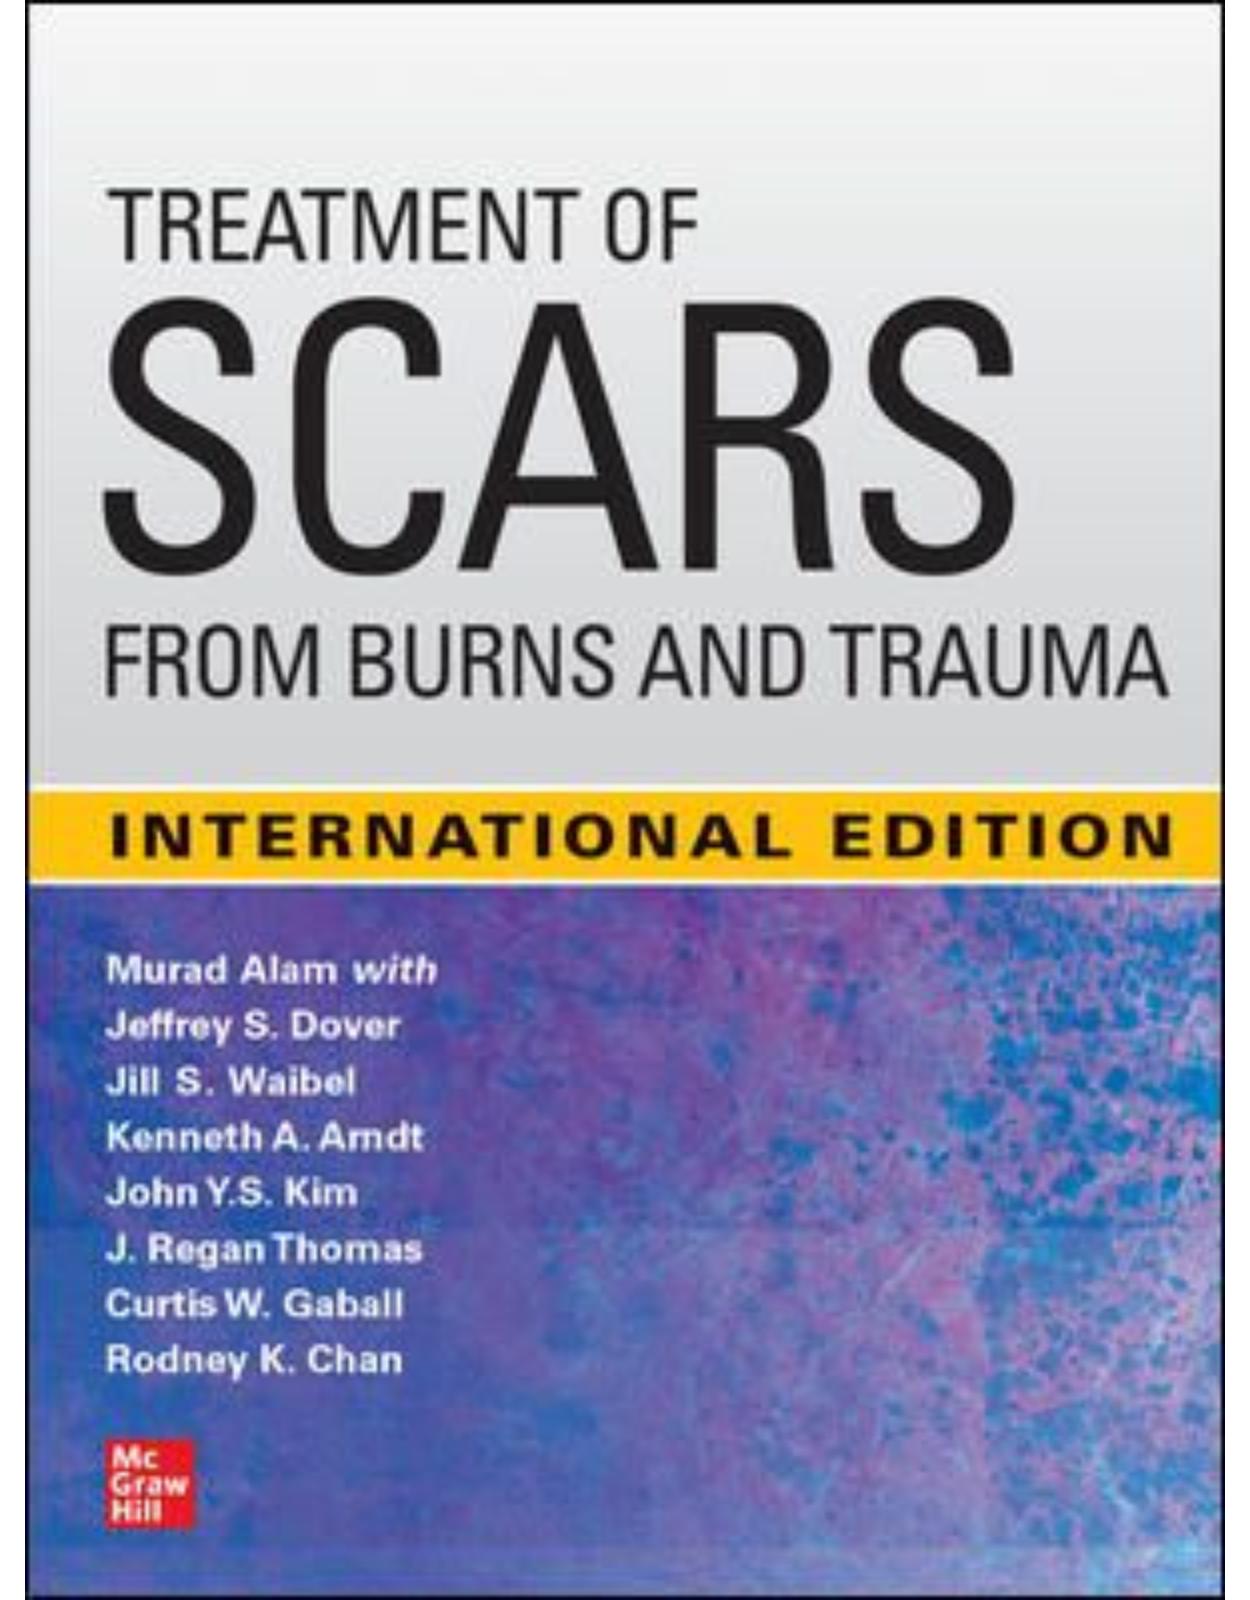 Treatment of Scars from Burns and Trauma